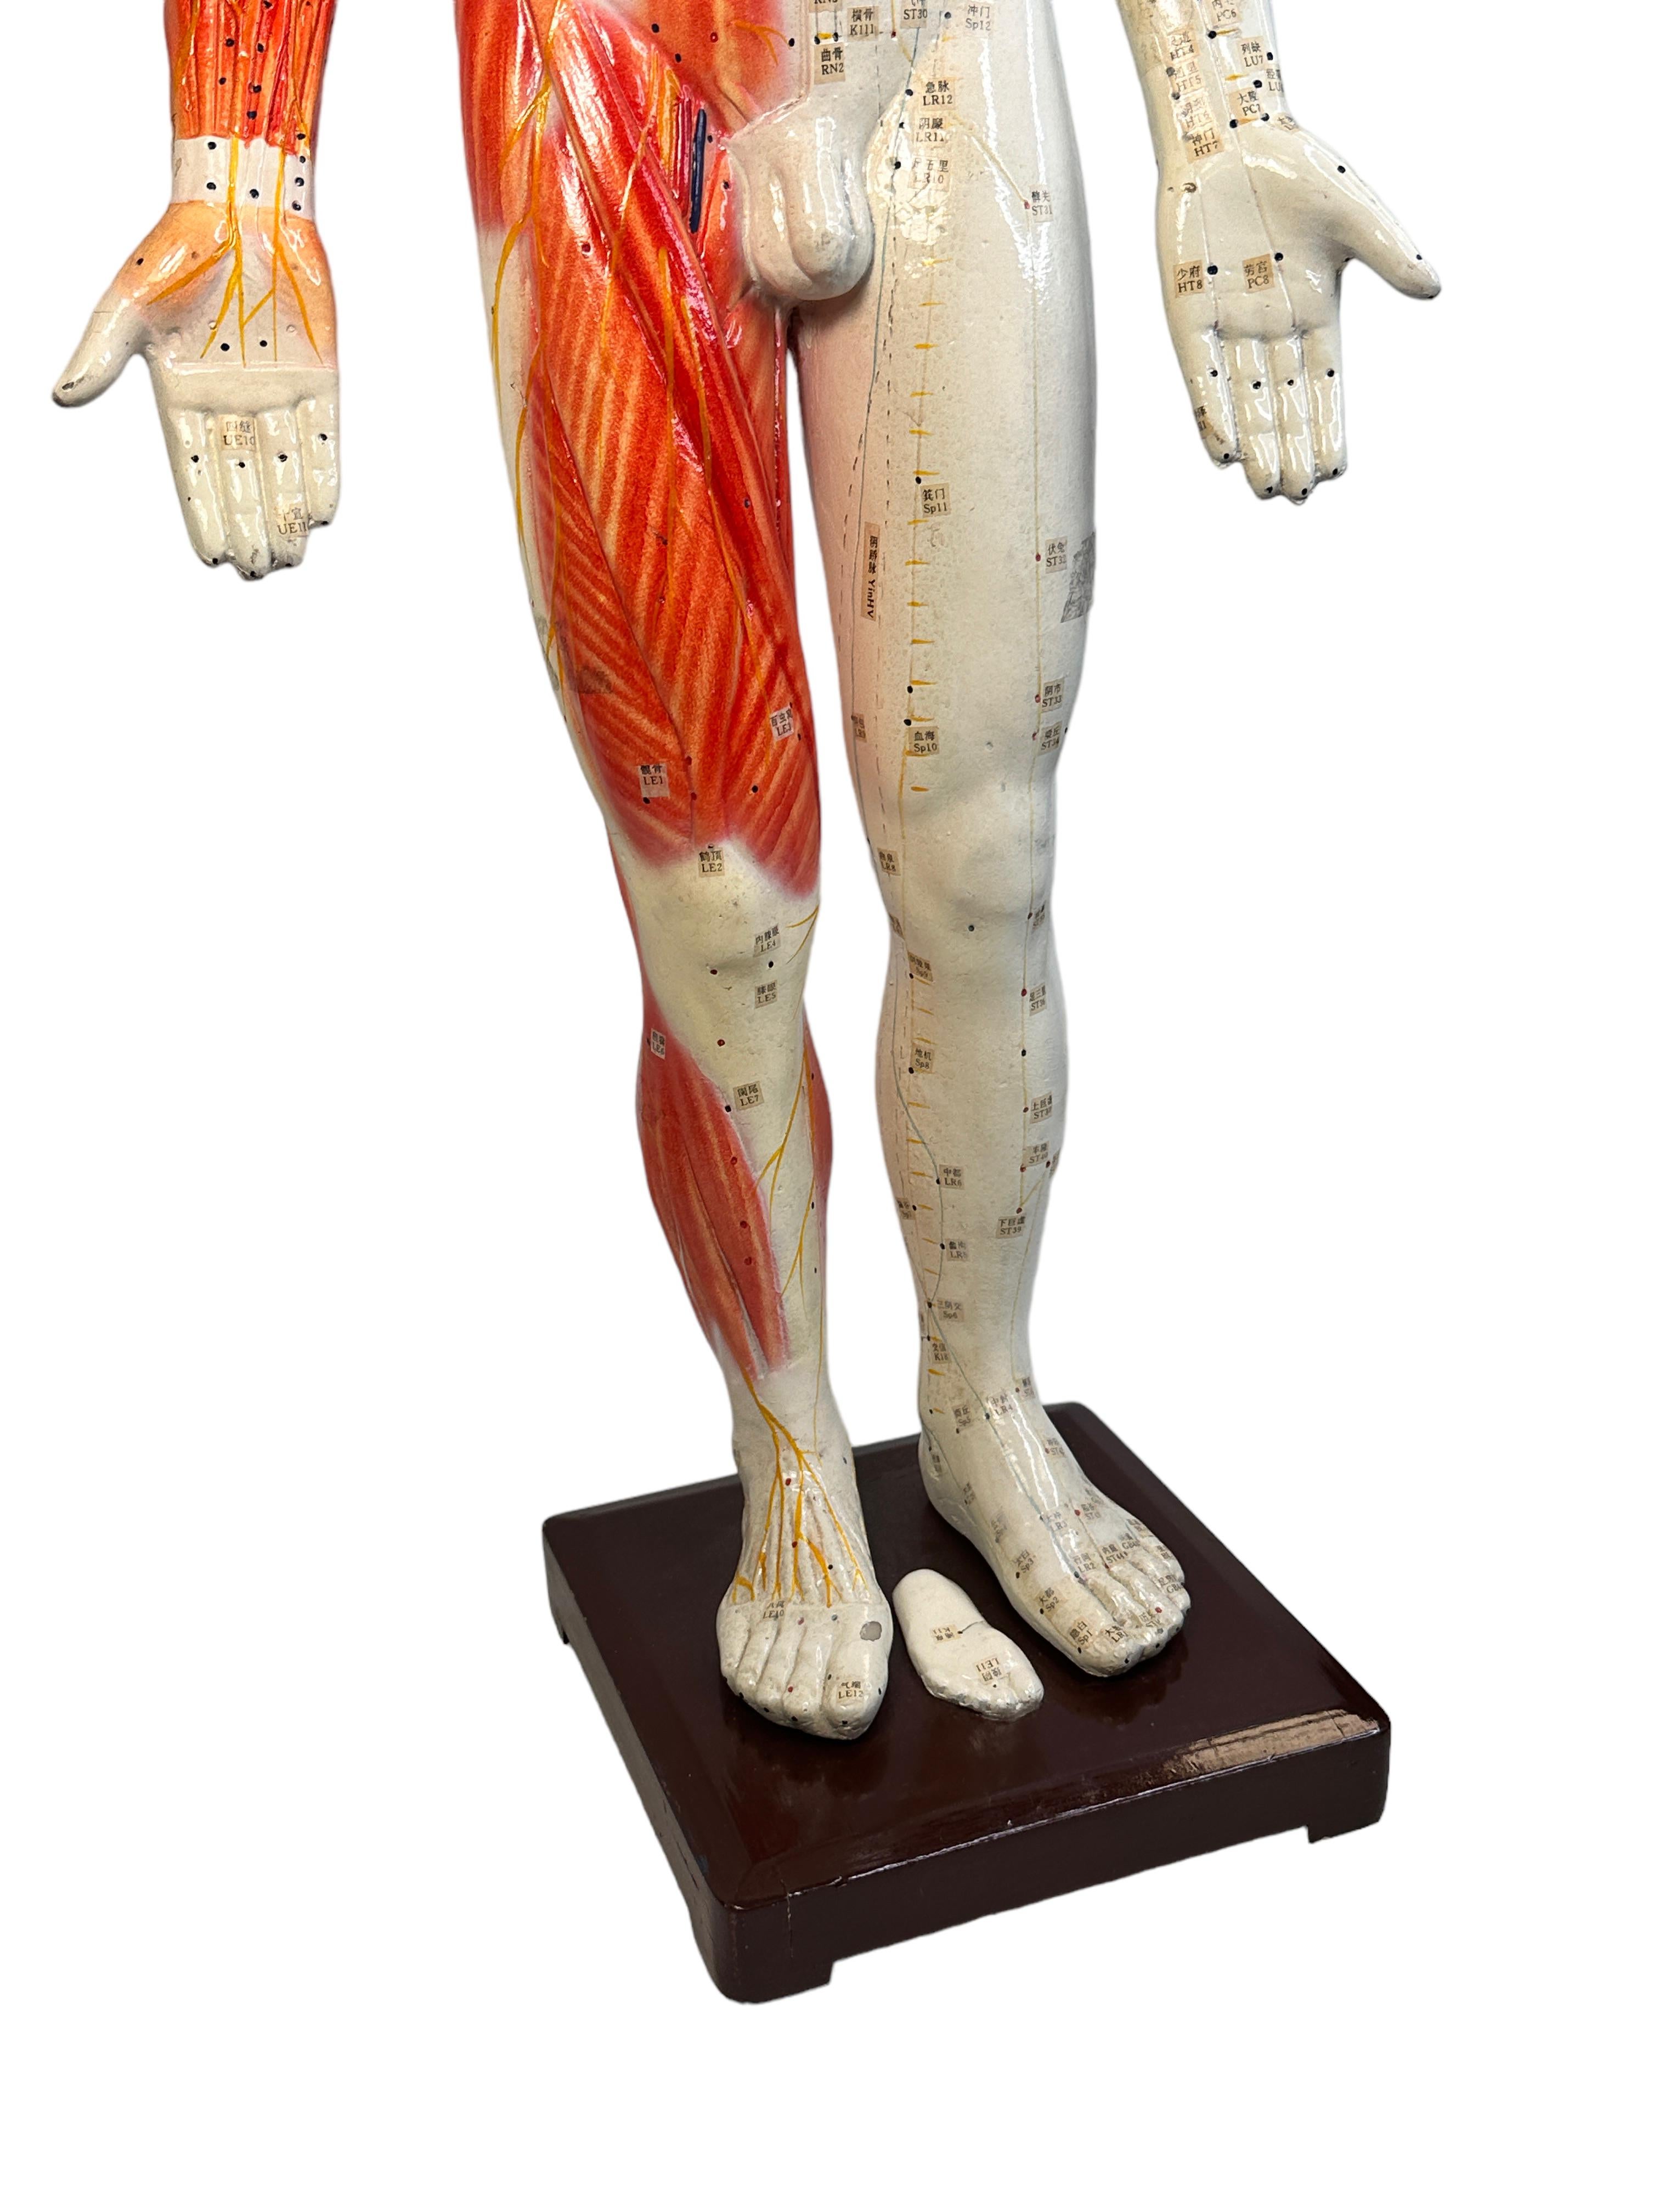 German Nice Acupuncture Model Statue Sculpture, Composition on Wood Stand Vintage 1960s For Sale